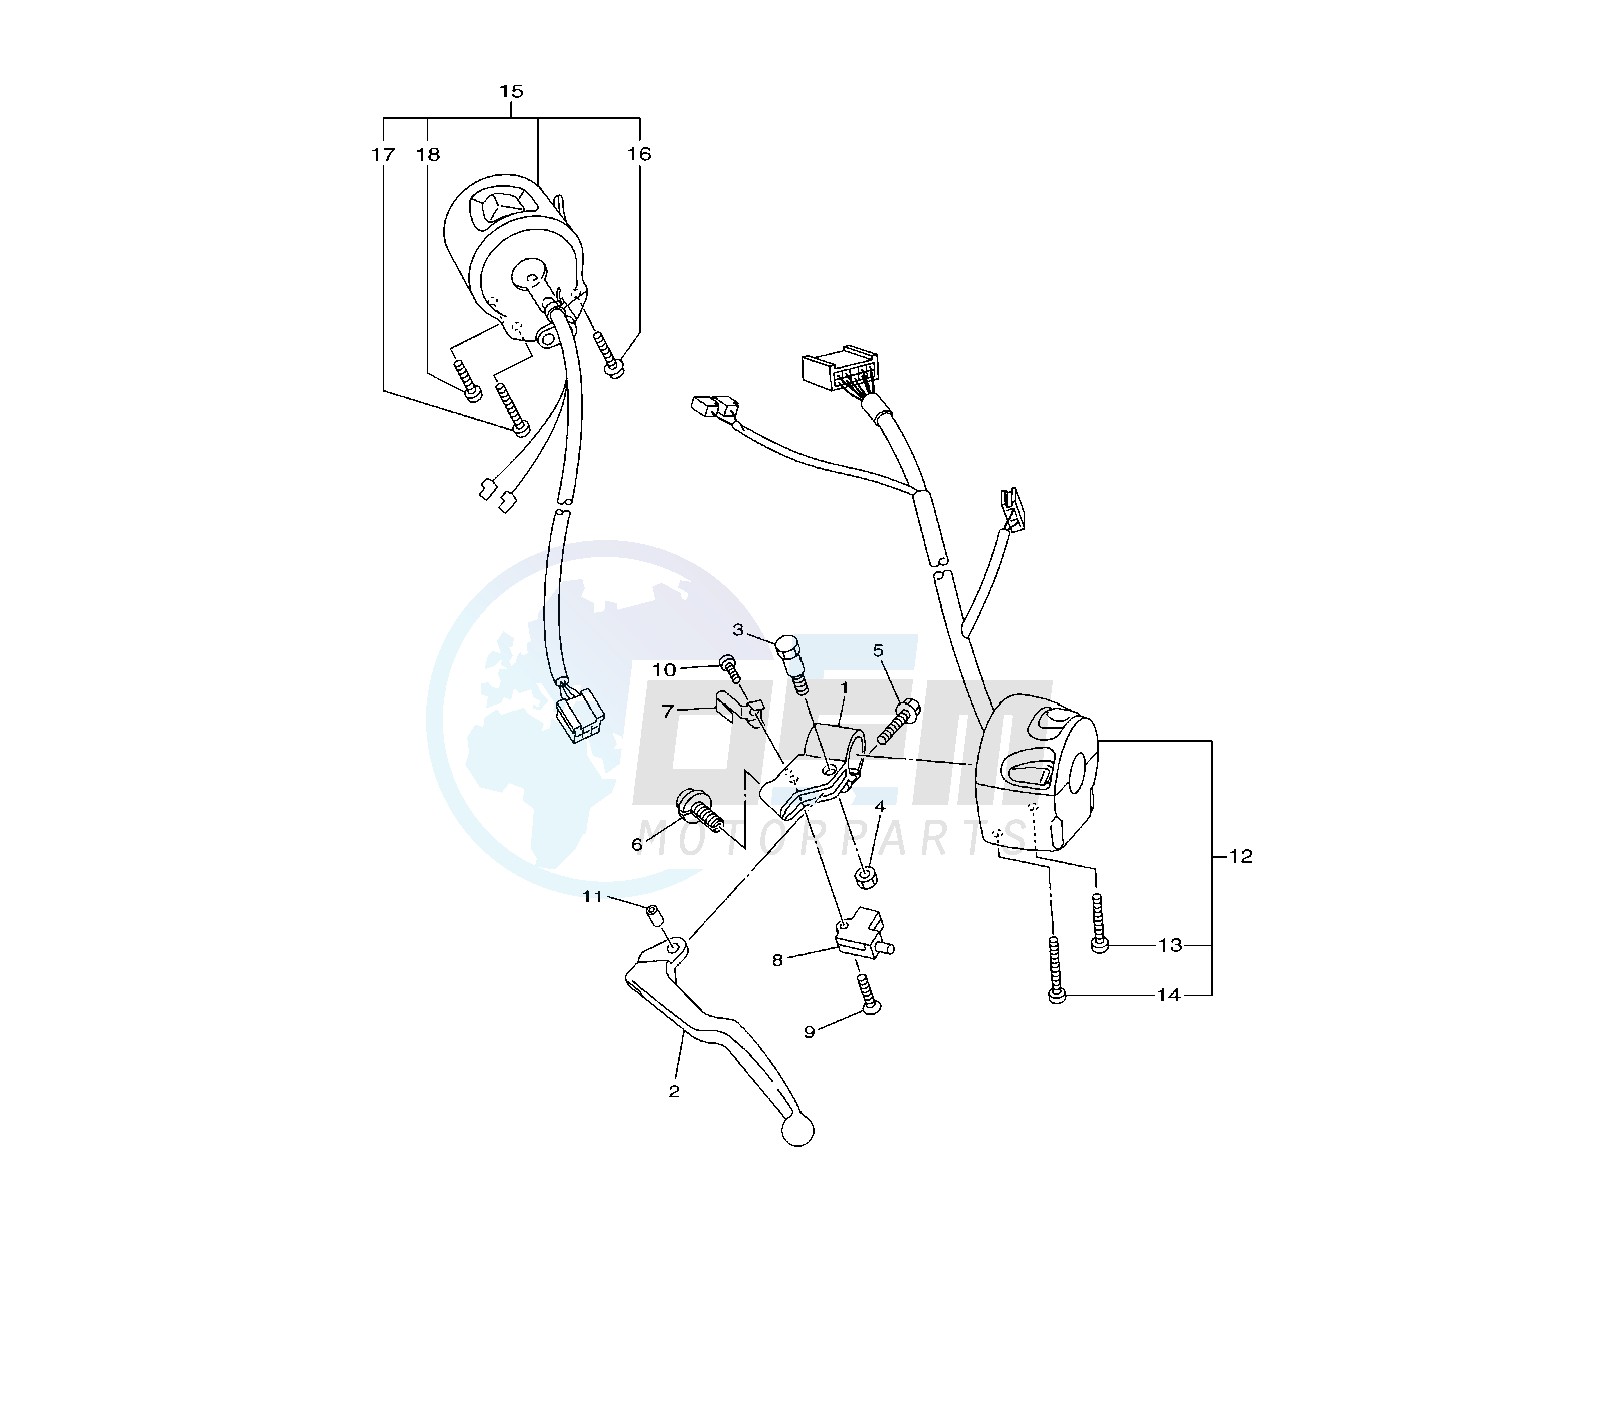 HANDLE SWITCH AND LEVER 36C6 blueprint